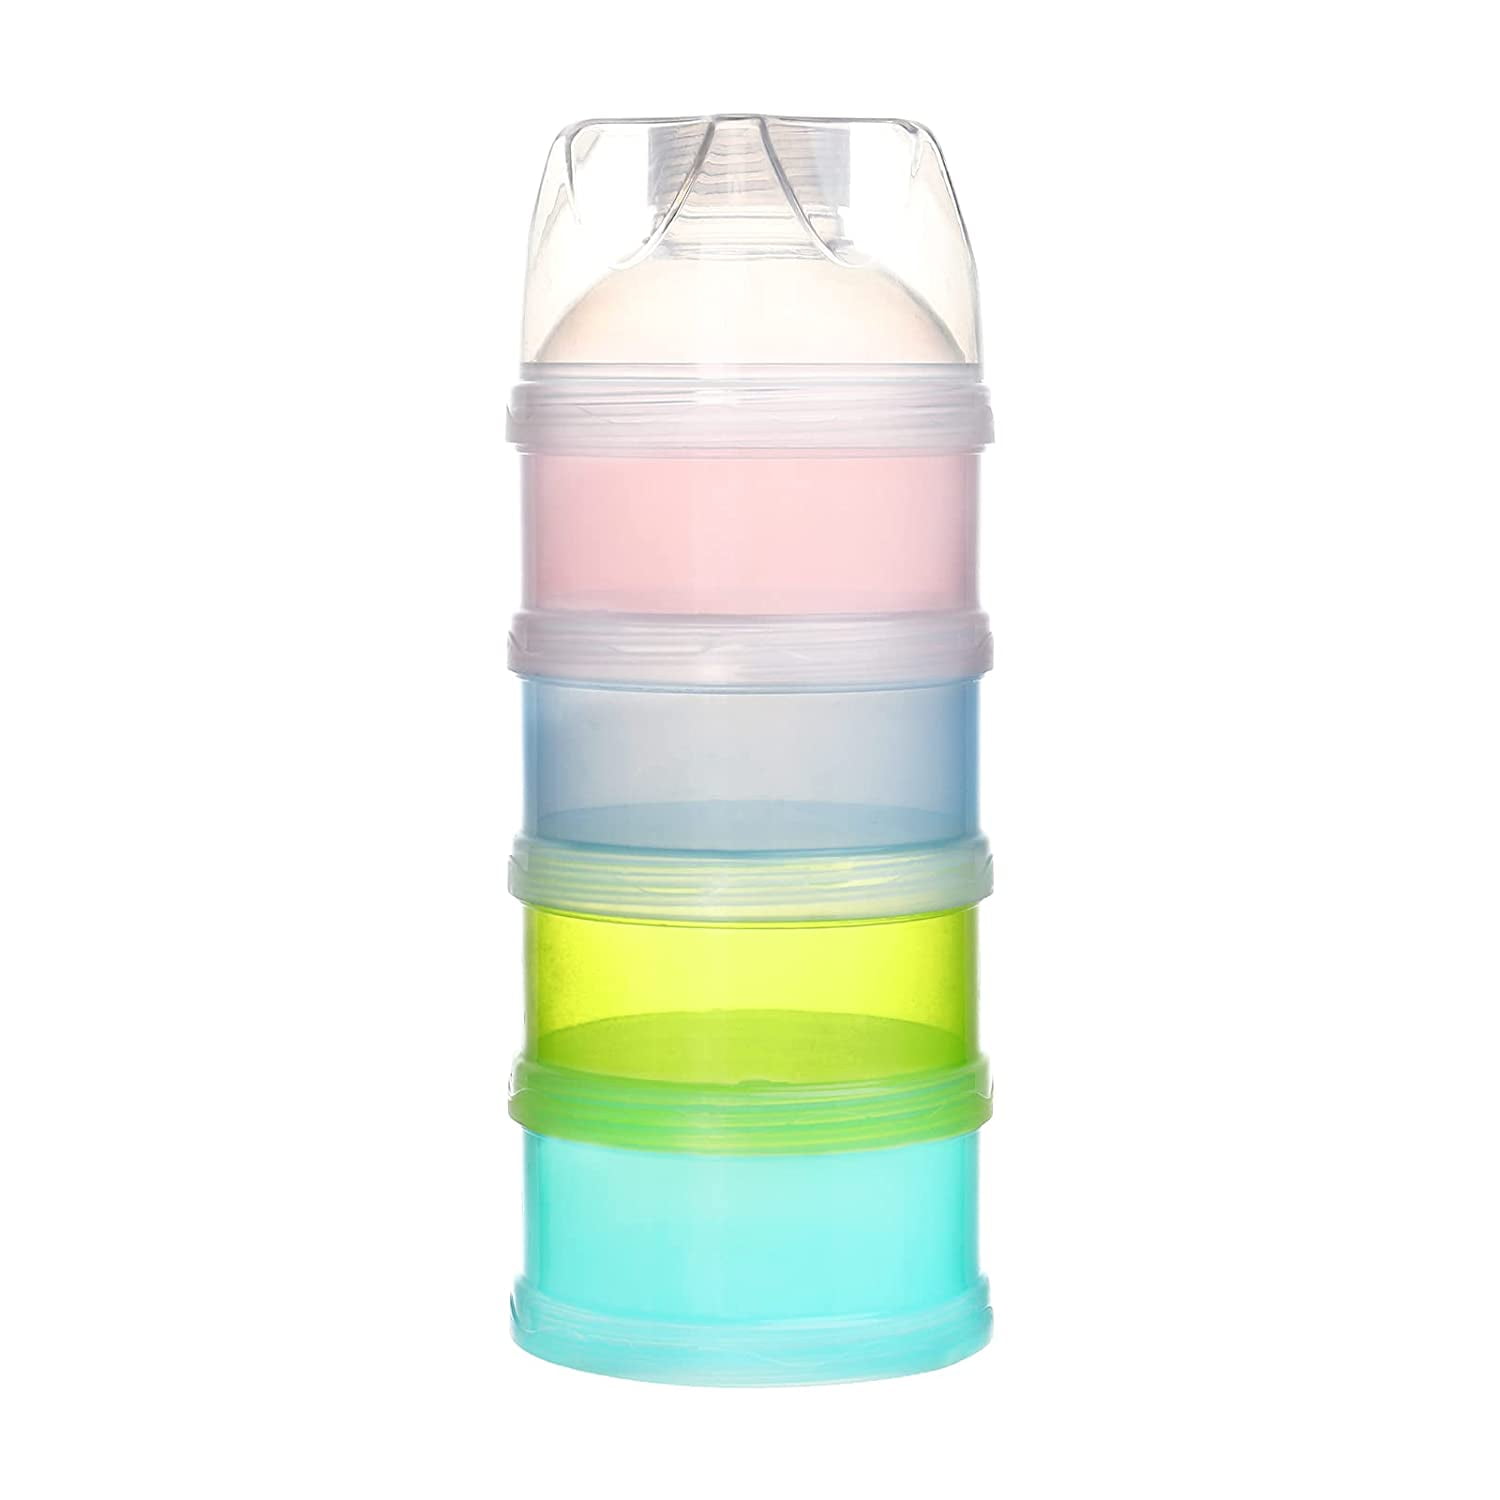 Baby Milk Powder Formula Dispenser, Non-Spill Portable and Stackable  Formula Travel Container, 3 Layers Storage Container for Protein Powder,  BPA Free